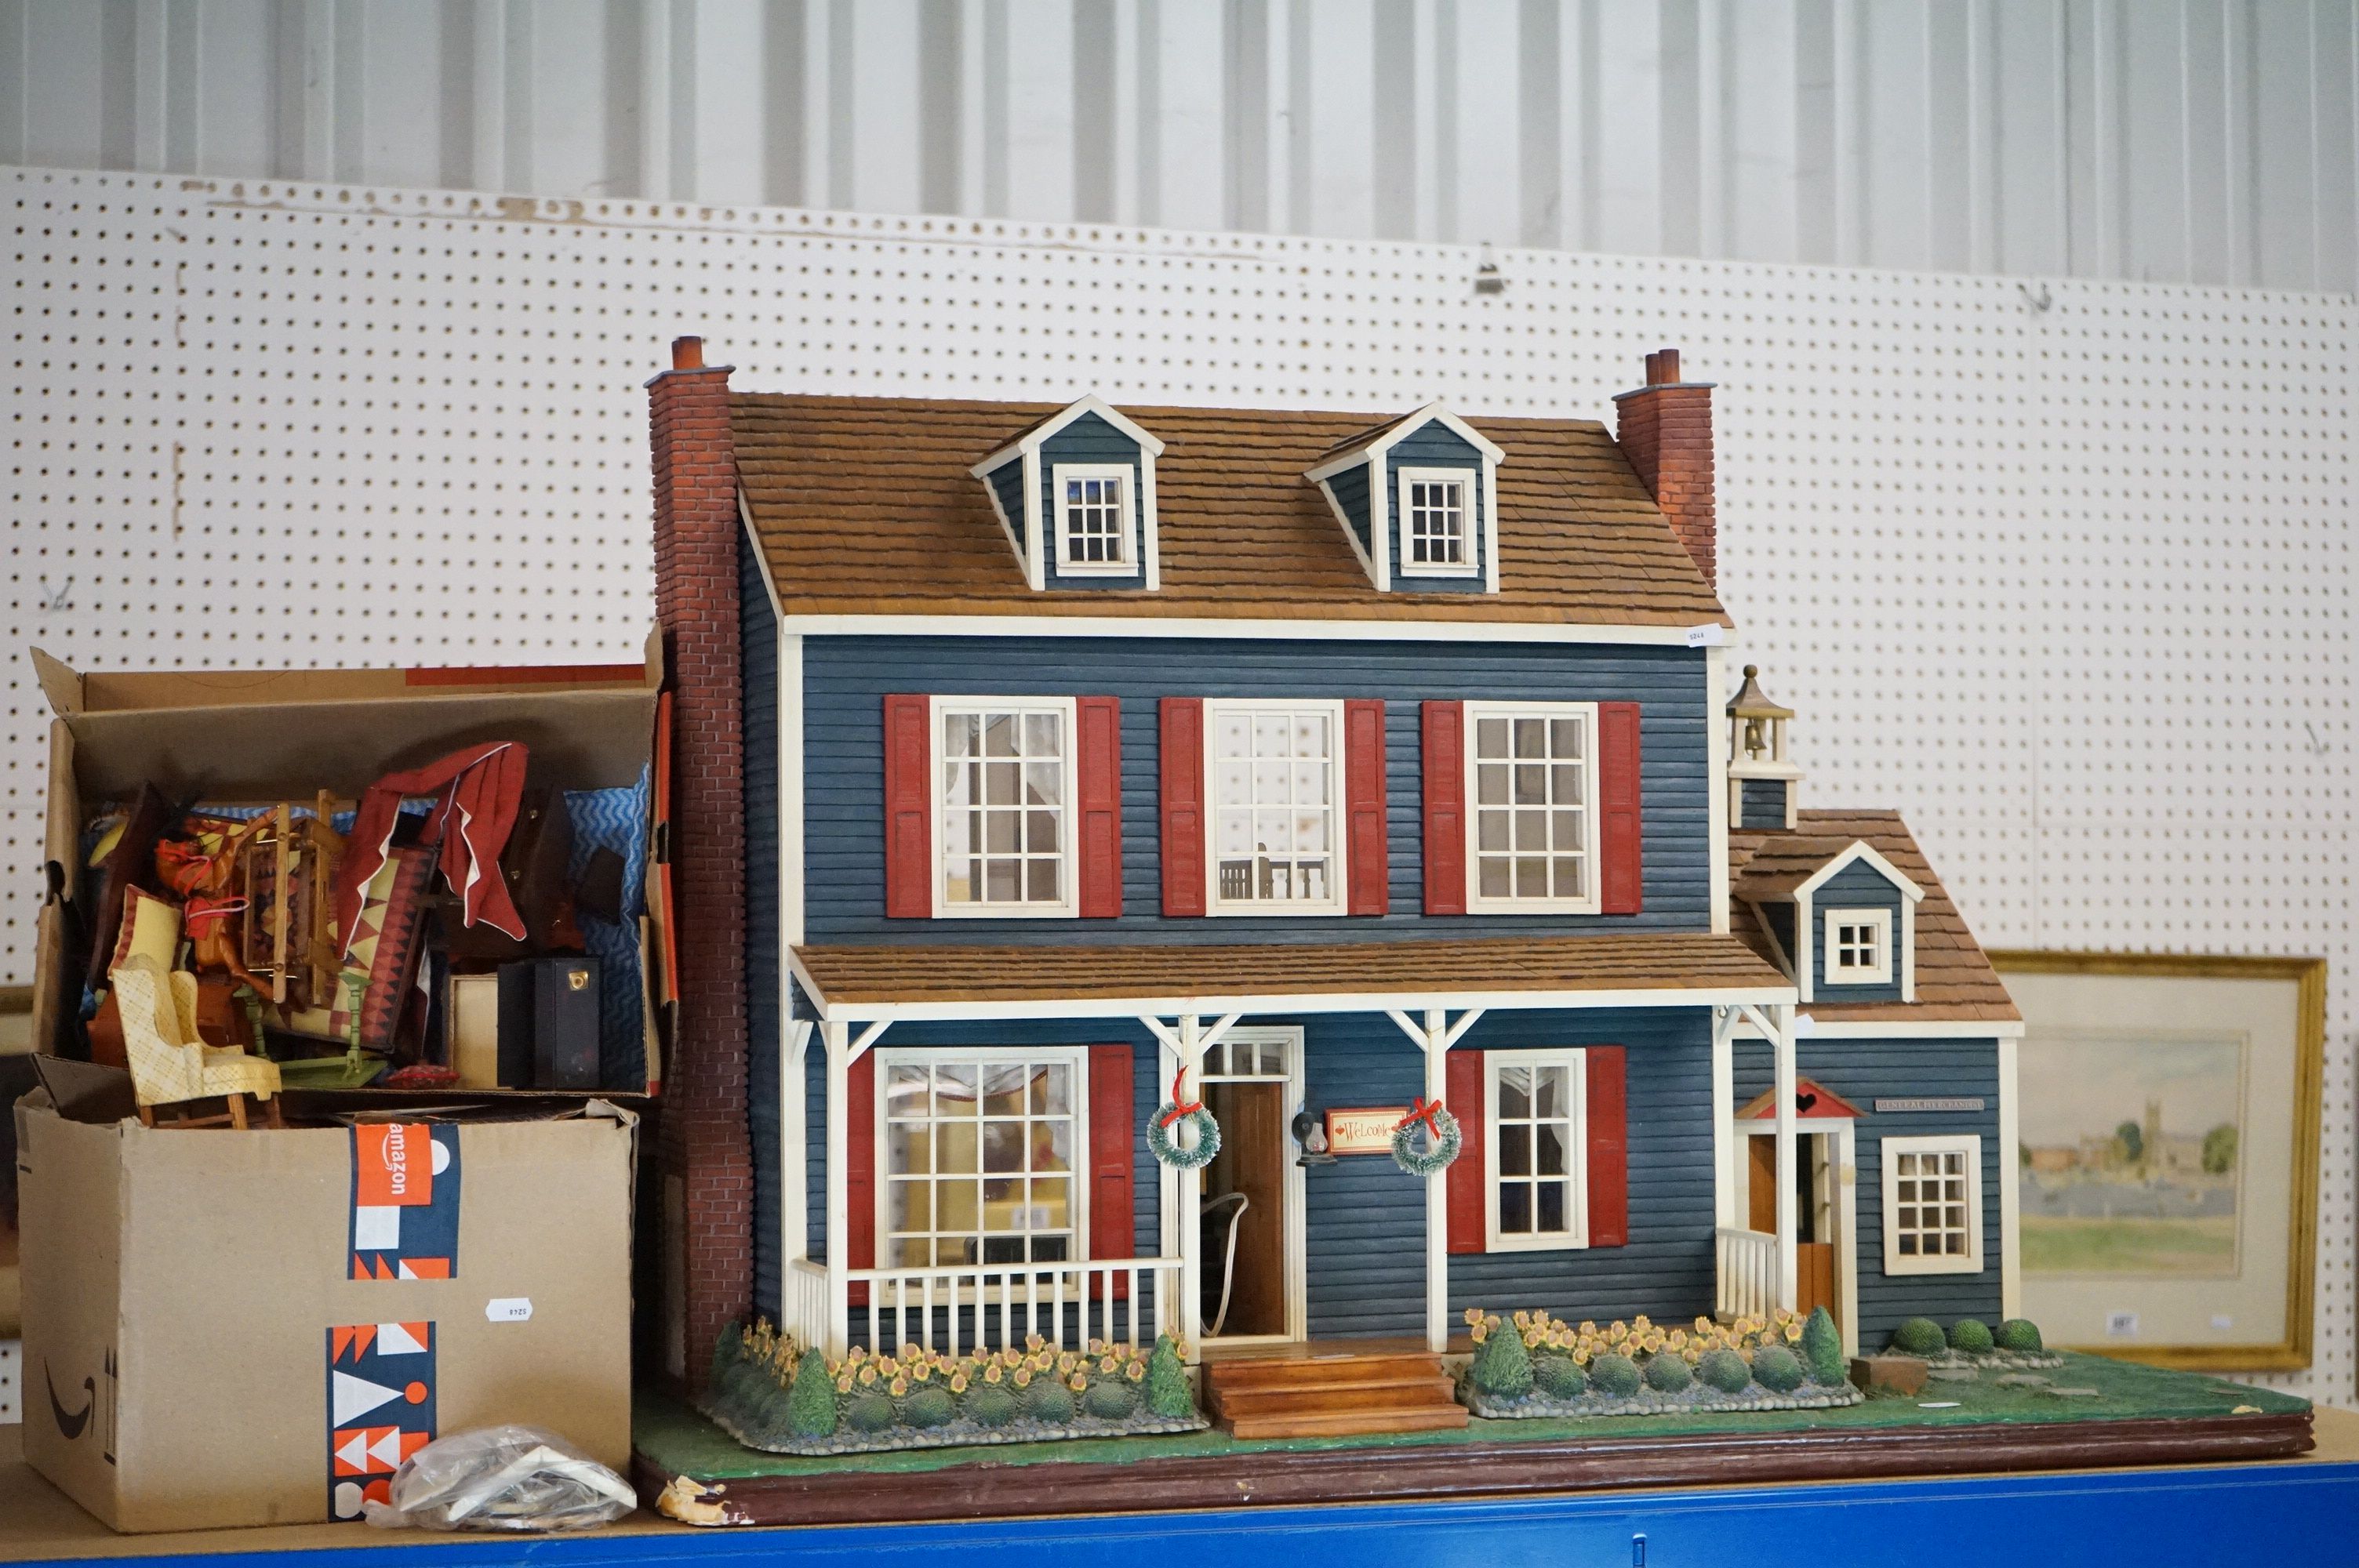 Franklin Mint ' Heartland Hollow ' large painted wooden dolls house & hardware store with garden